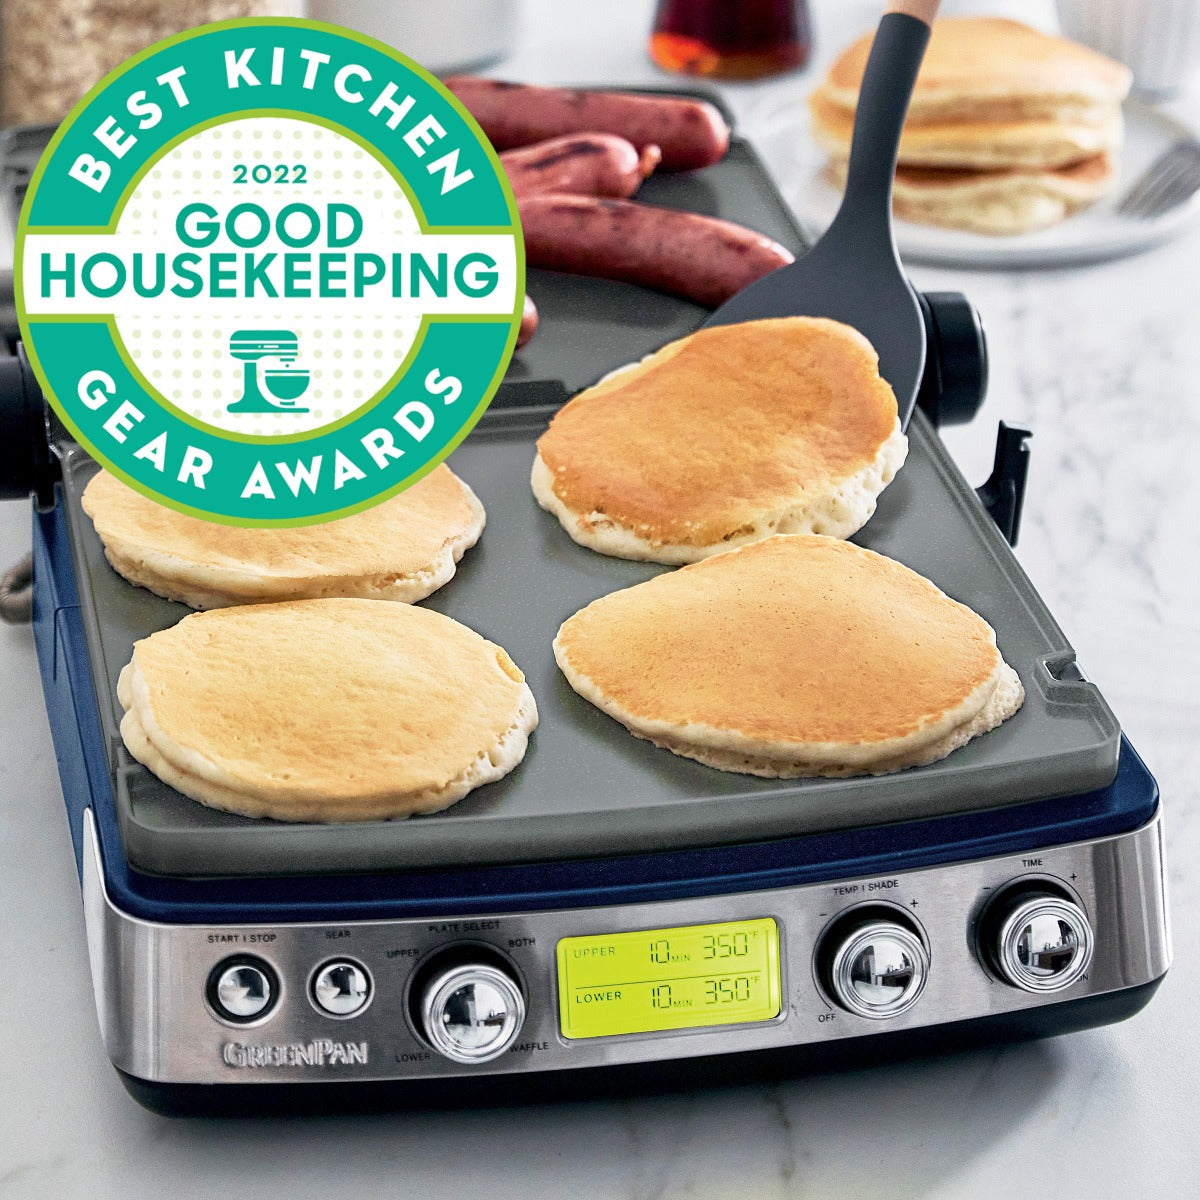 GreenPan Elite Cloud Cream 7-in-1 Grill, Griddle and Waffle Maker